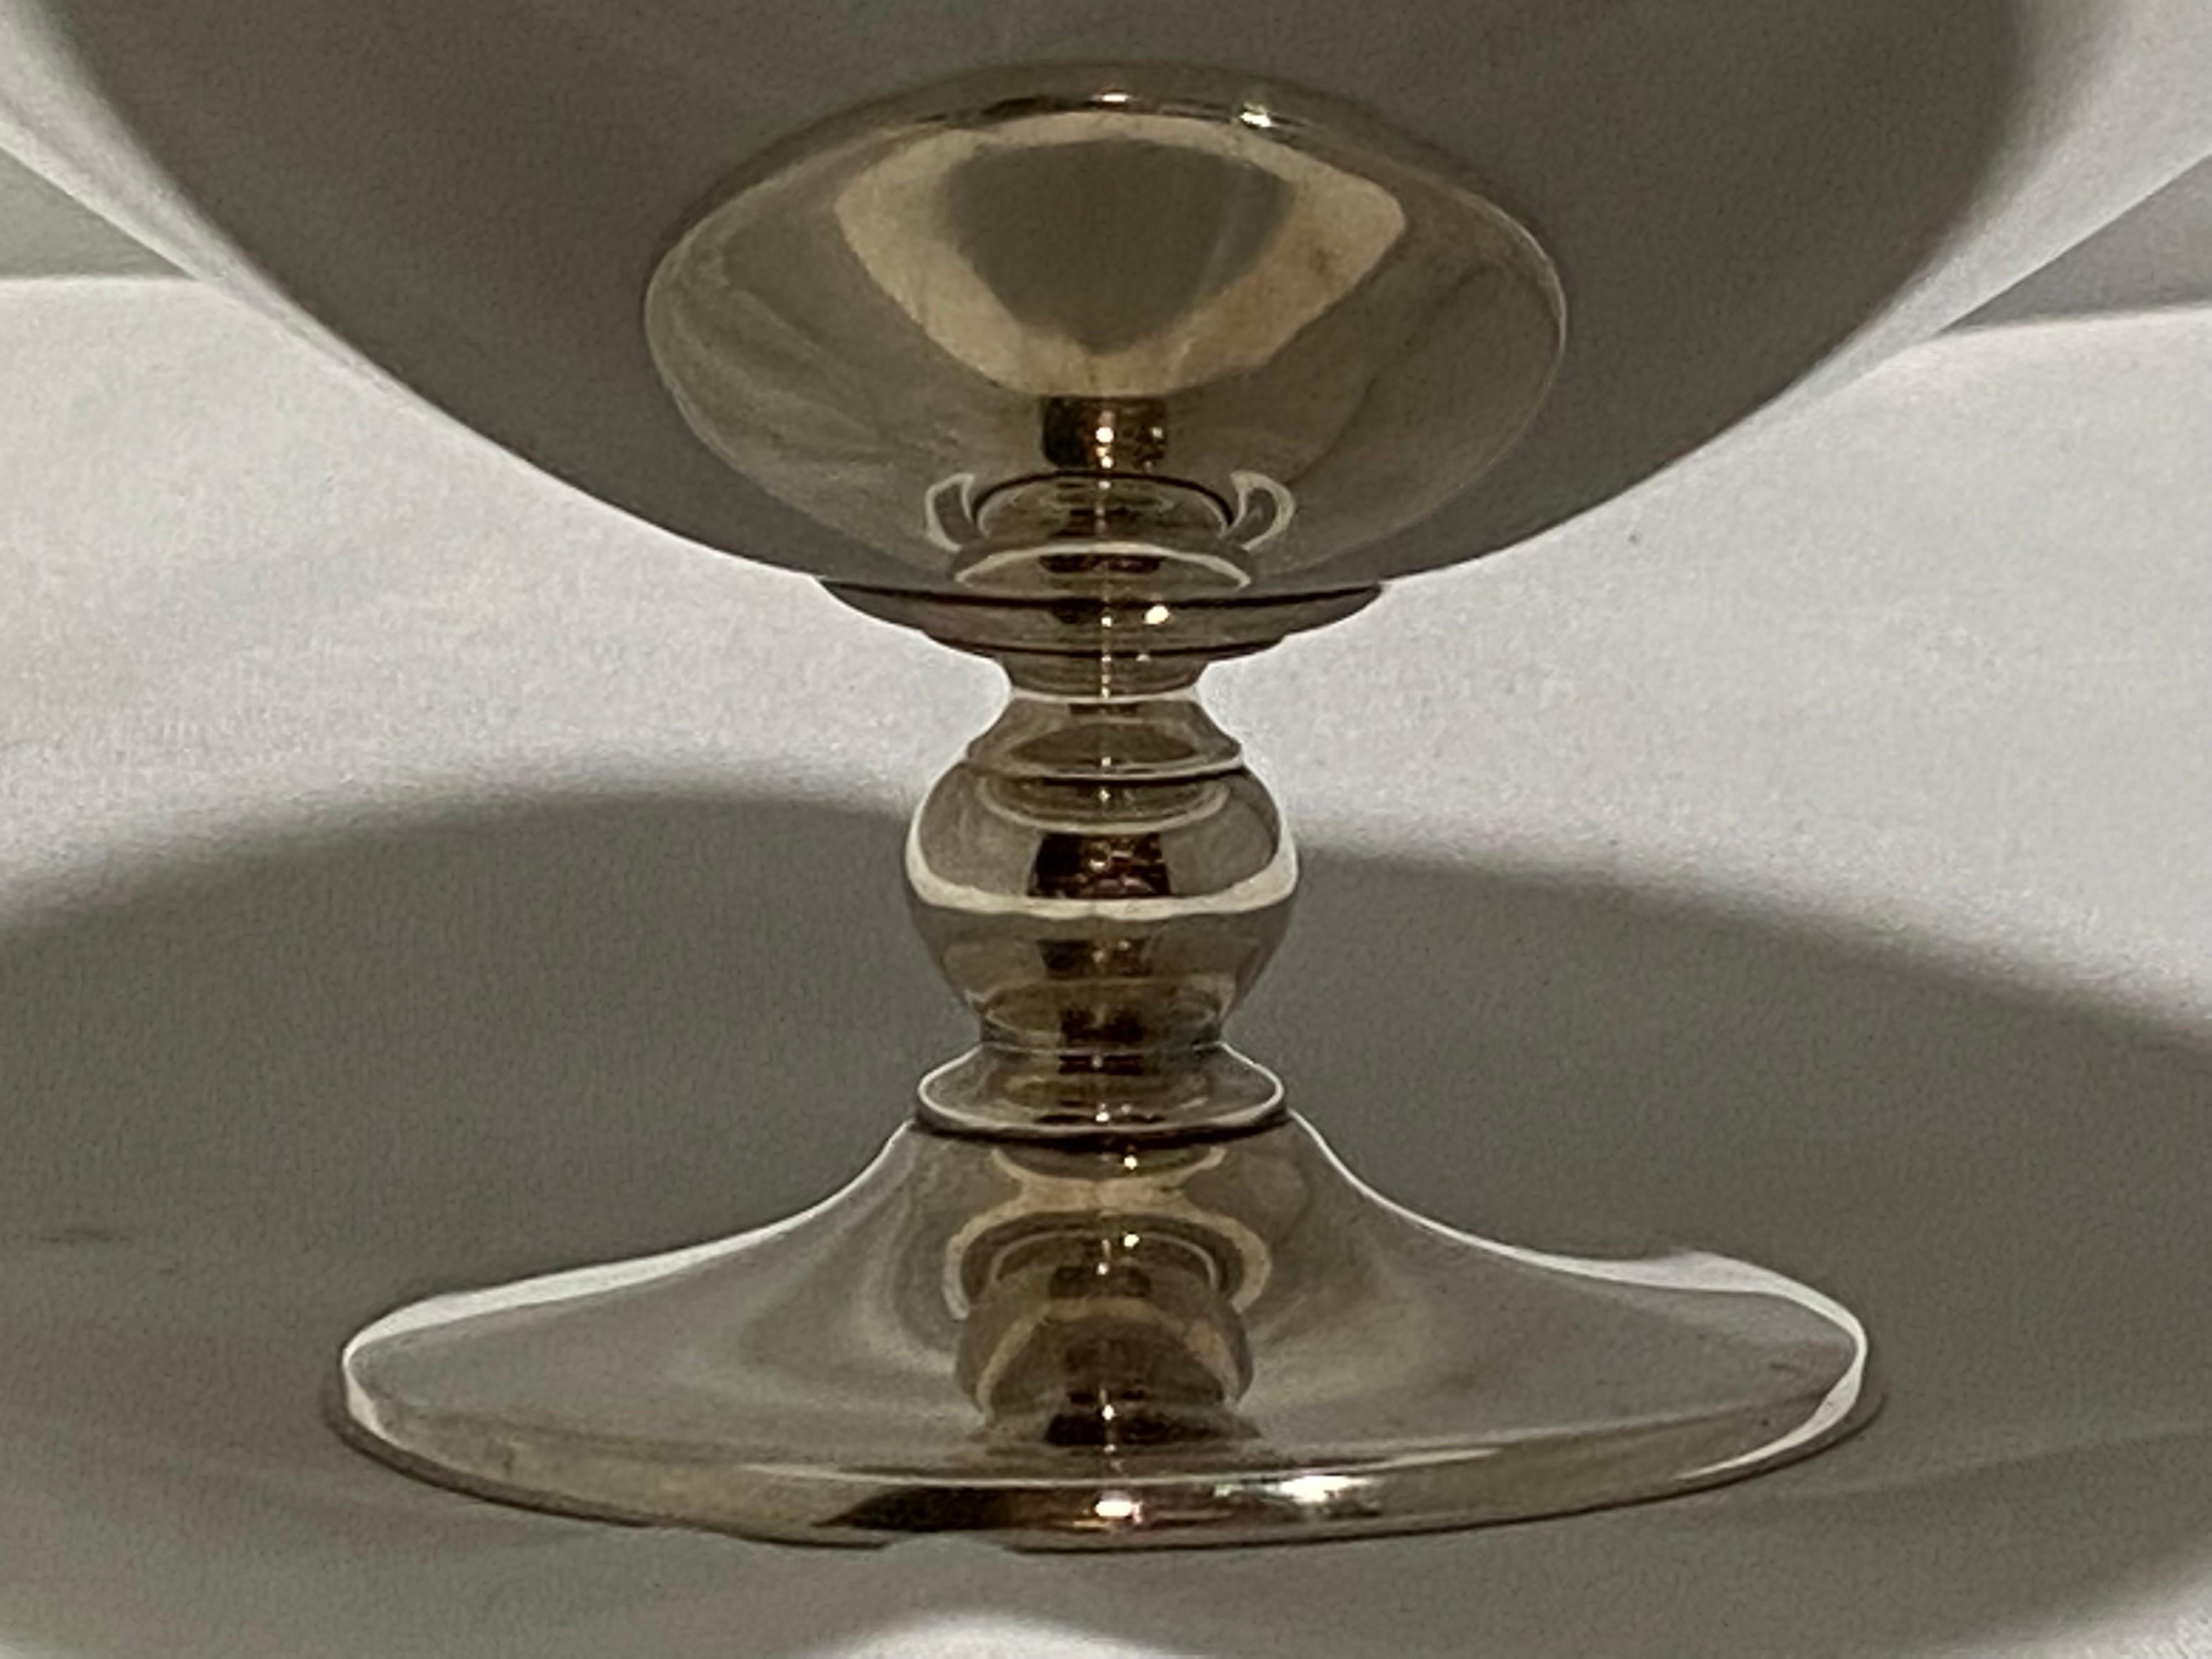 Tiffany and Company 1940's Sterling Silver Footed Bowl or Compote Dish For Sale 1